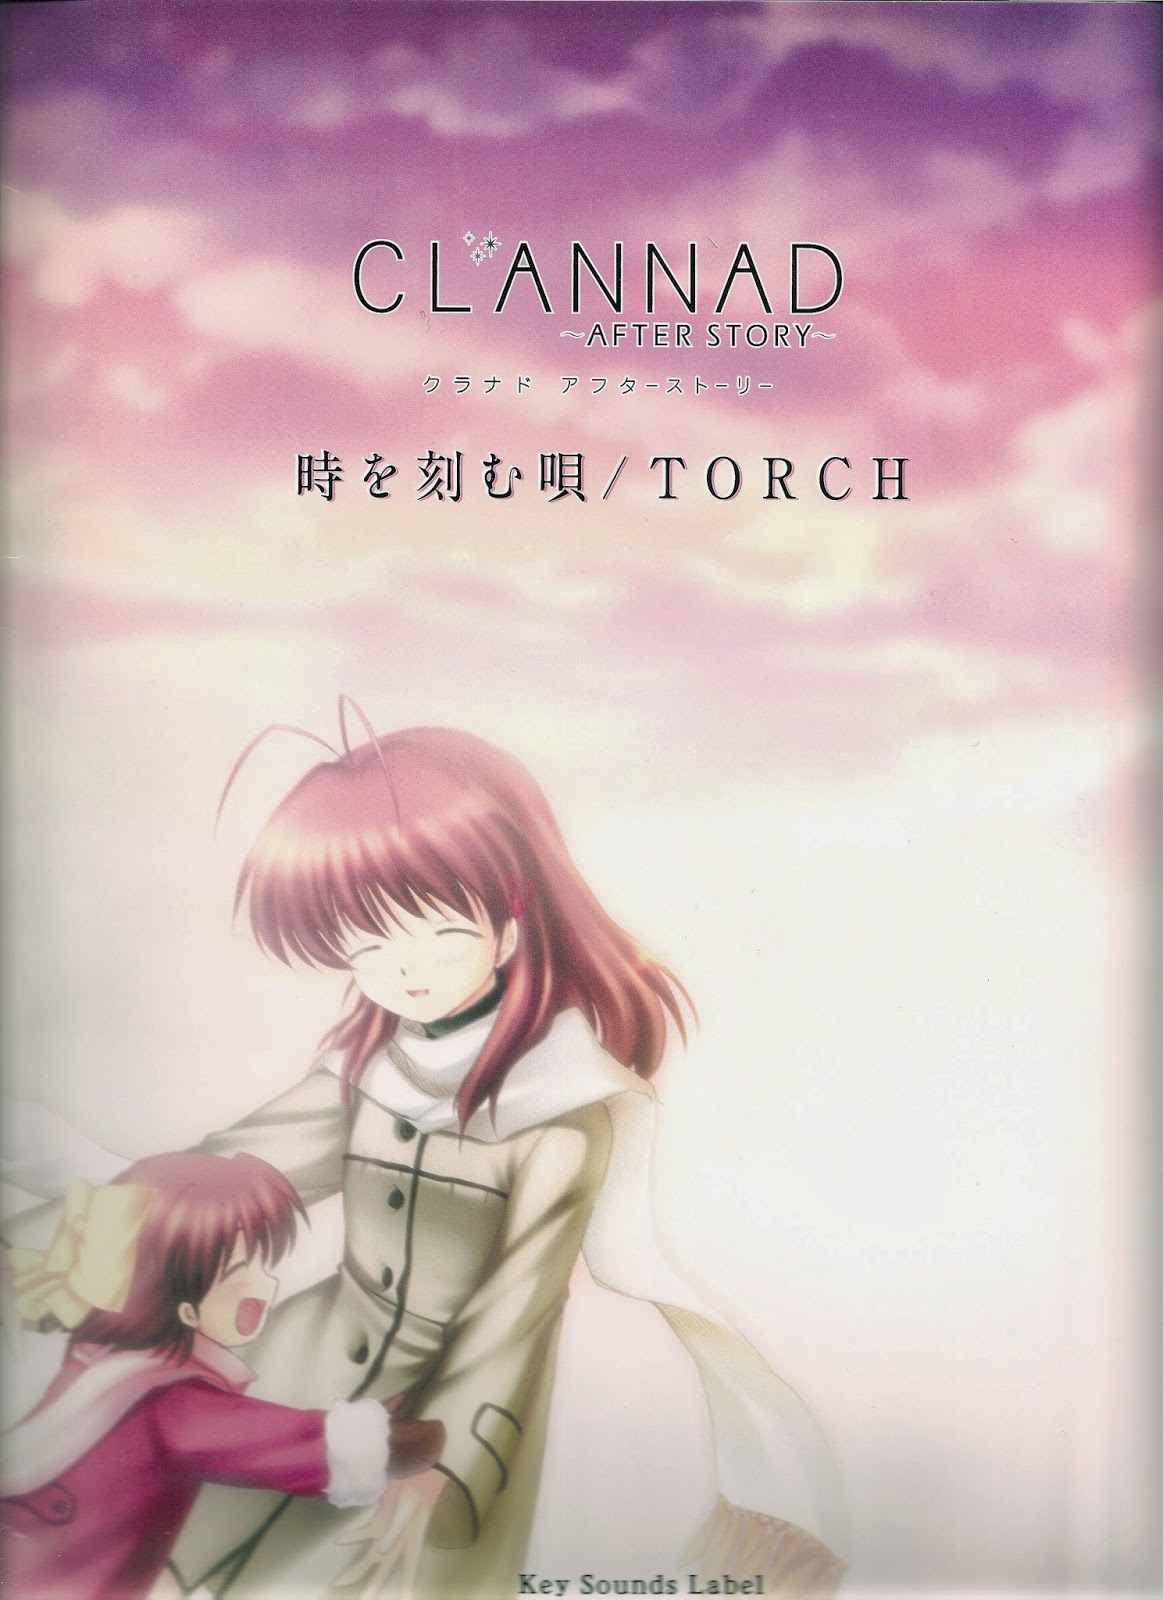 Takuya Soundtrack: Clannad OST Collection